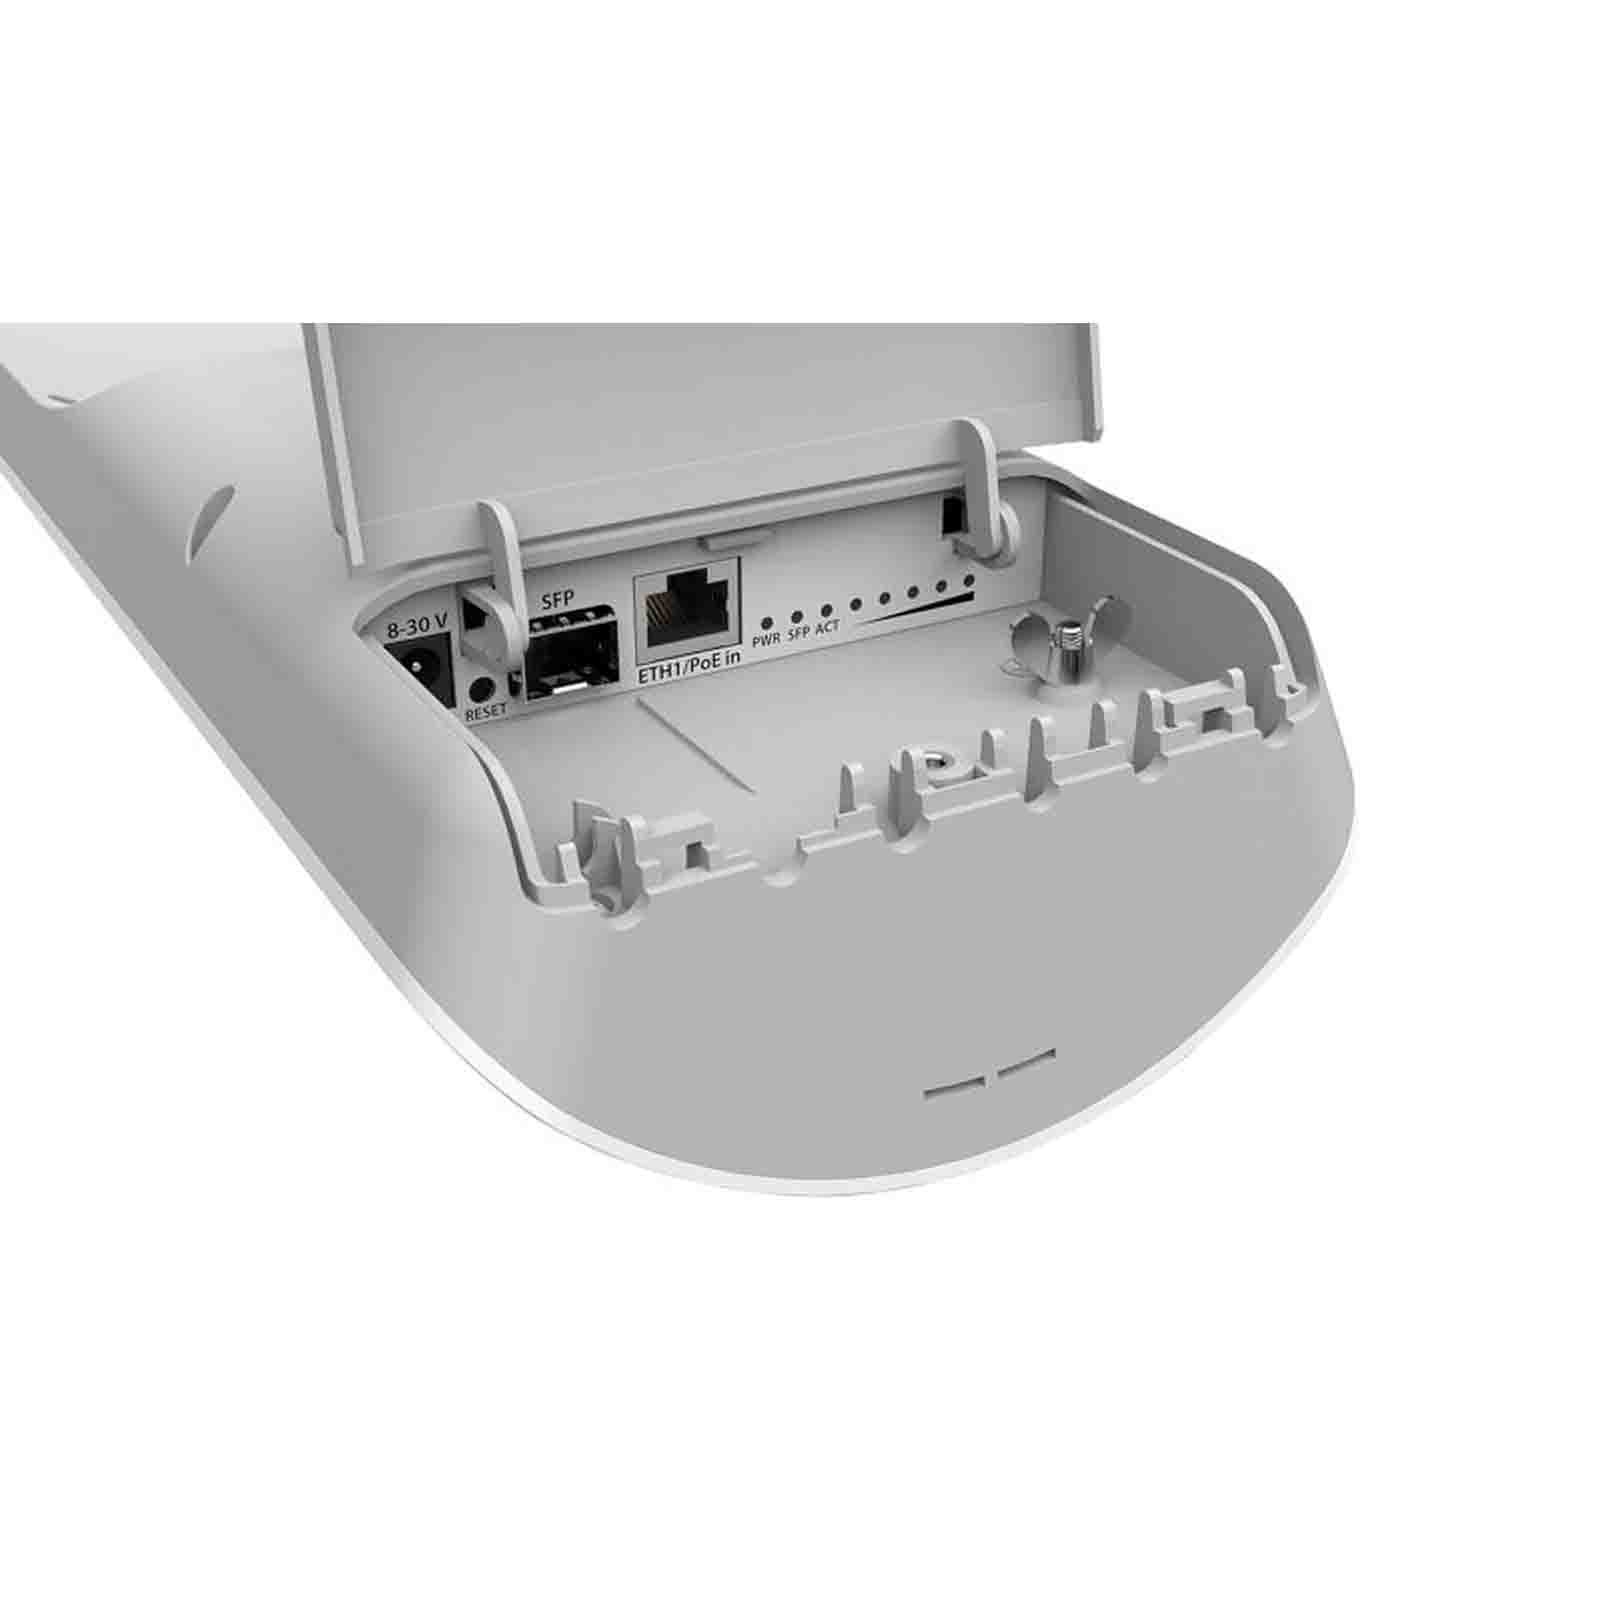 MikroTik mANTBox 15s (RB921GS-5HPacD-15S)